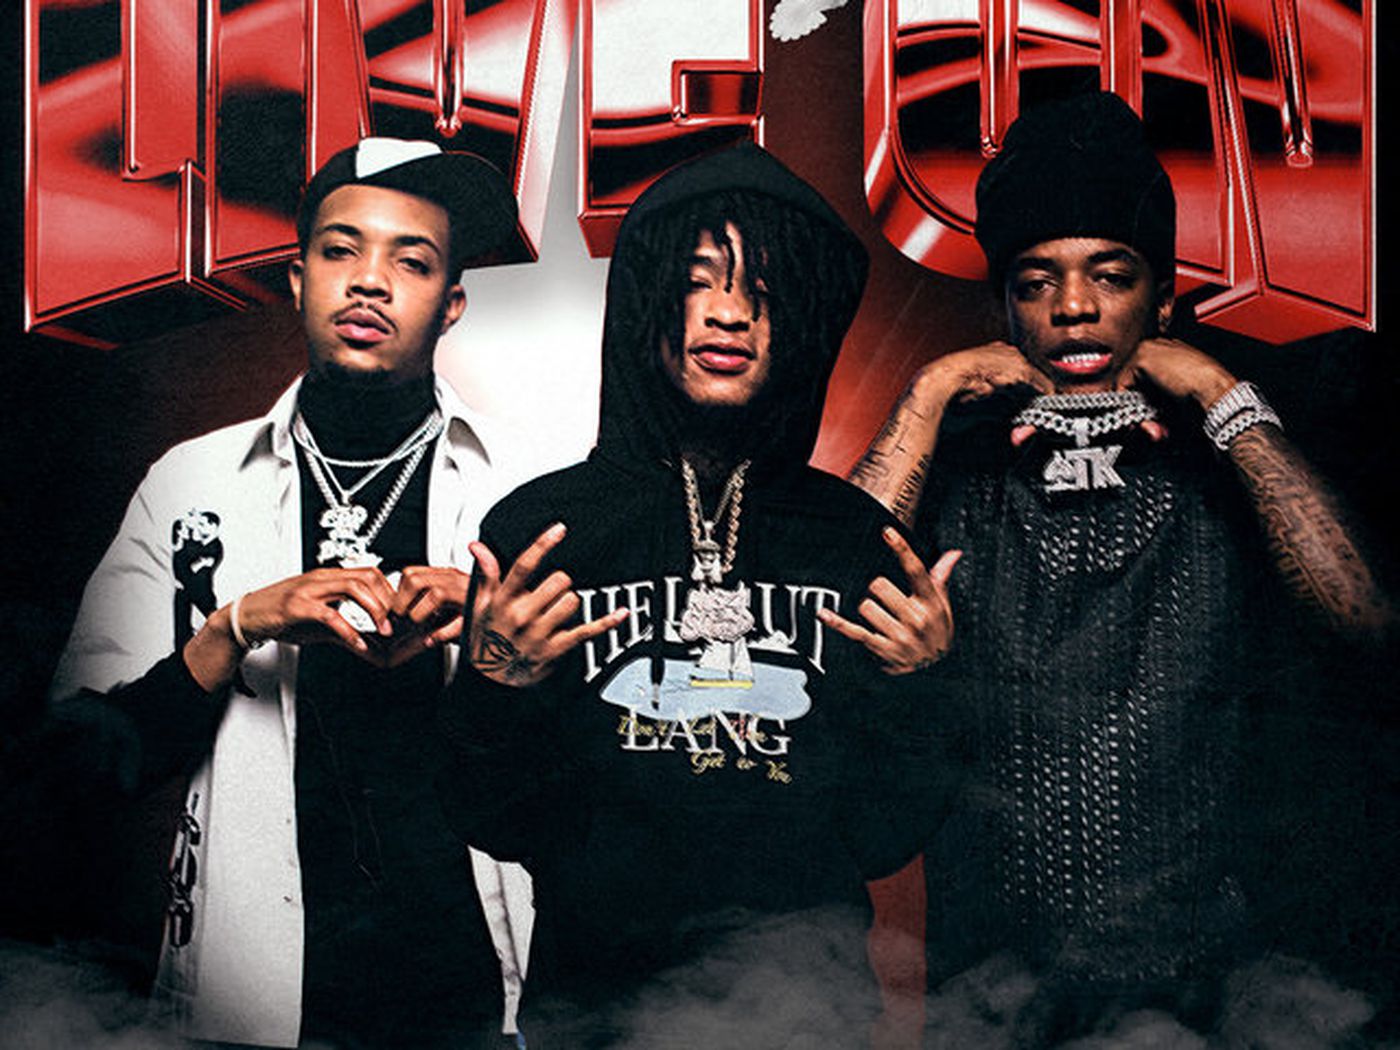 G Herbo and Yungeen Ace hop on Nuski2squad's “Live On (Thuggin Days)” track